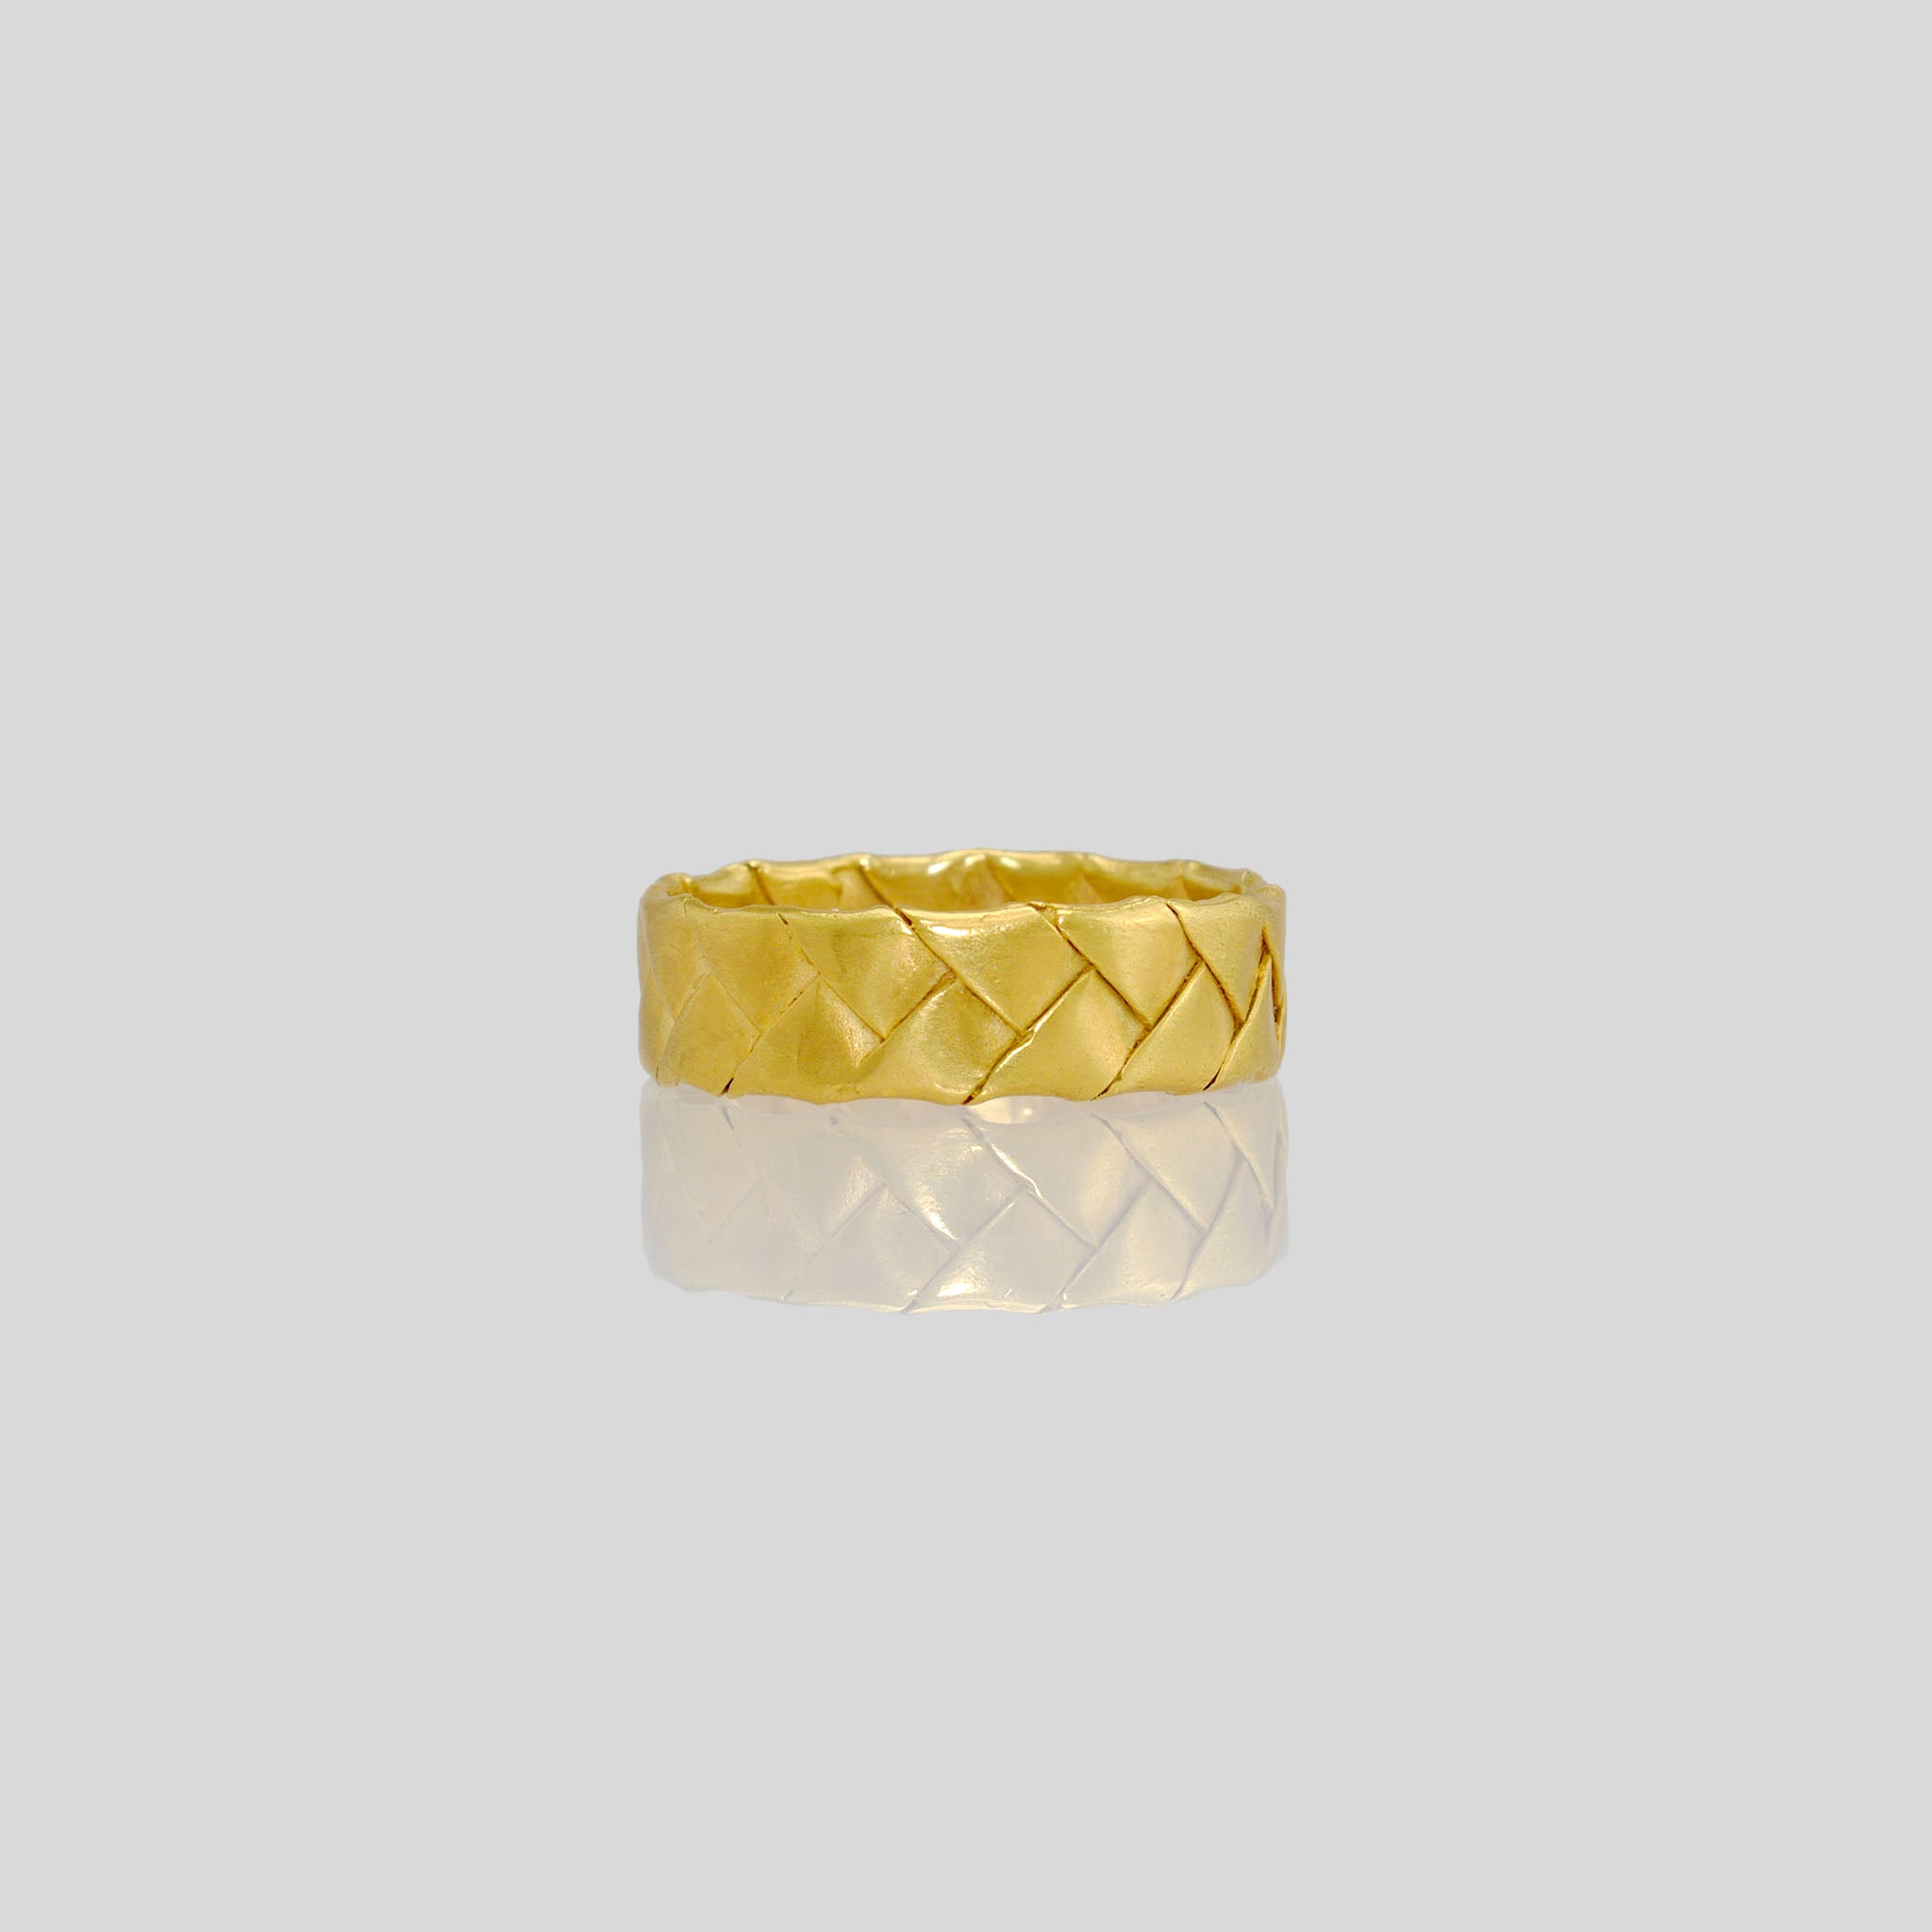 Gold Braid Ring crafted from intertwined gold strands, meticulously modeled using a unique paper processing technique. Clean, precise, and versatile, suitable for daily wear.